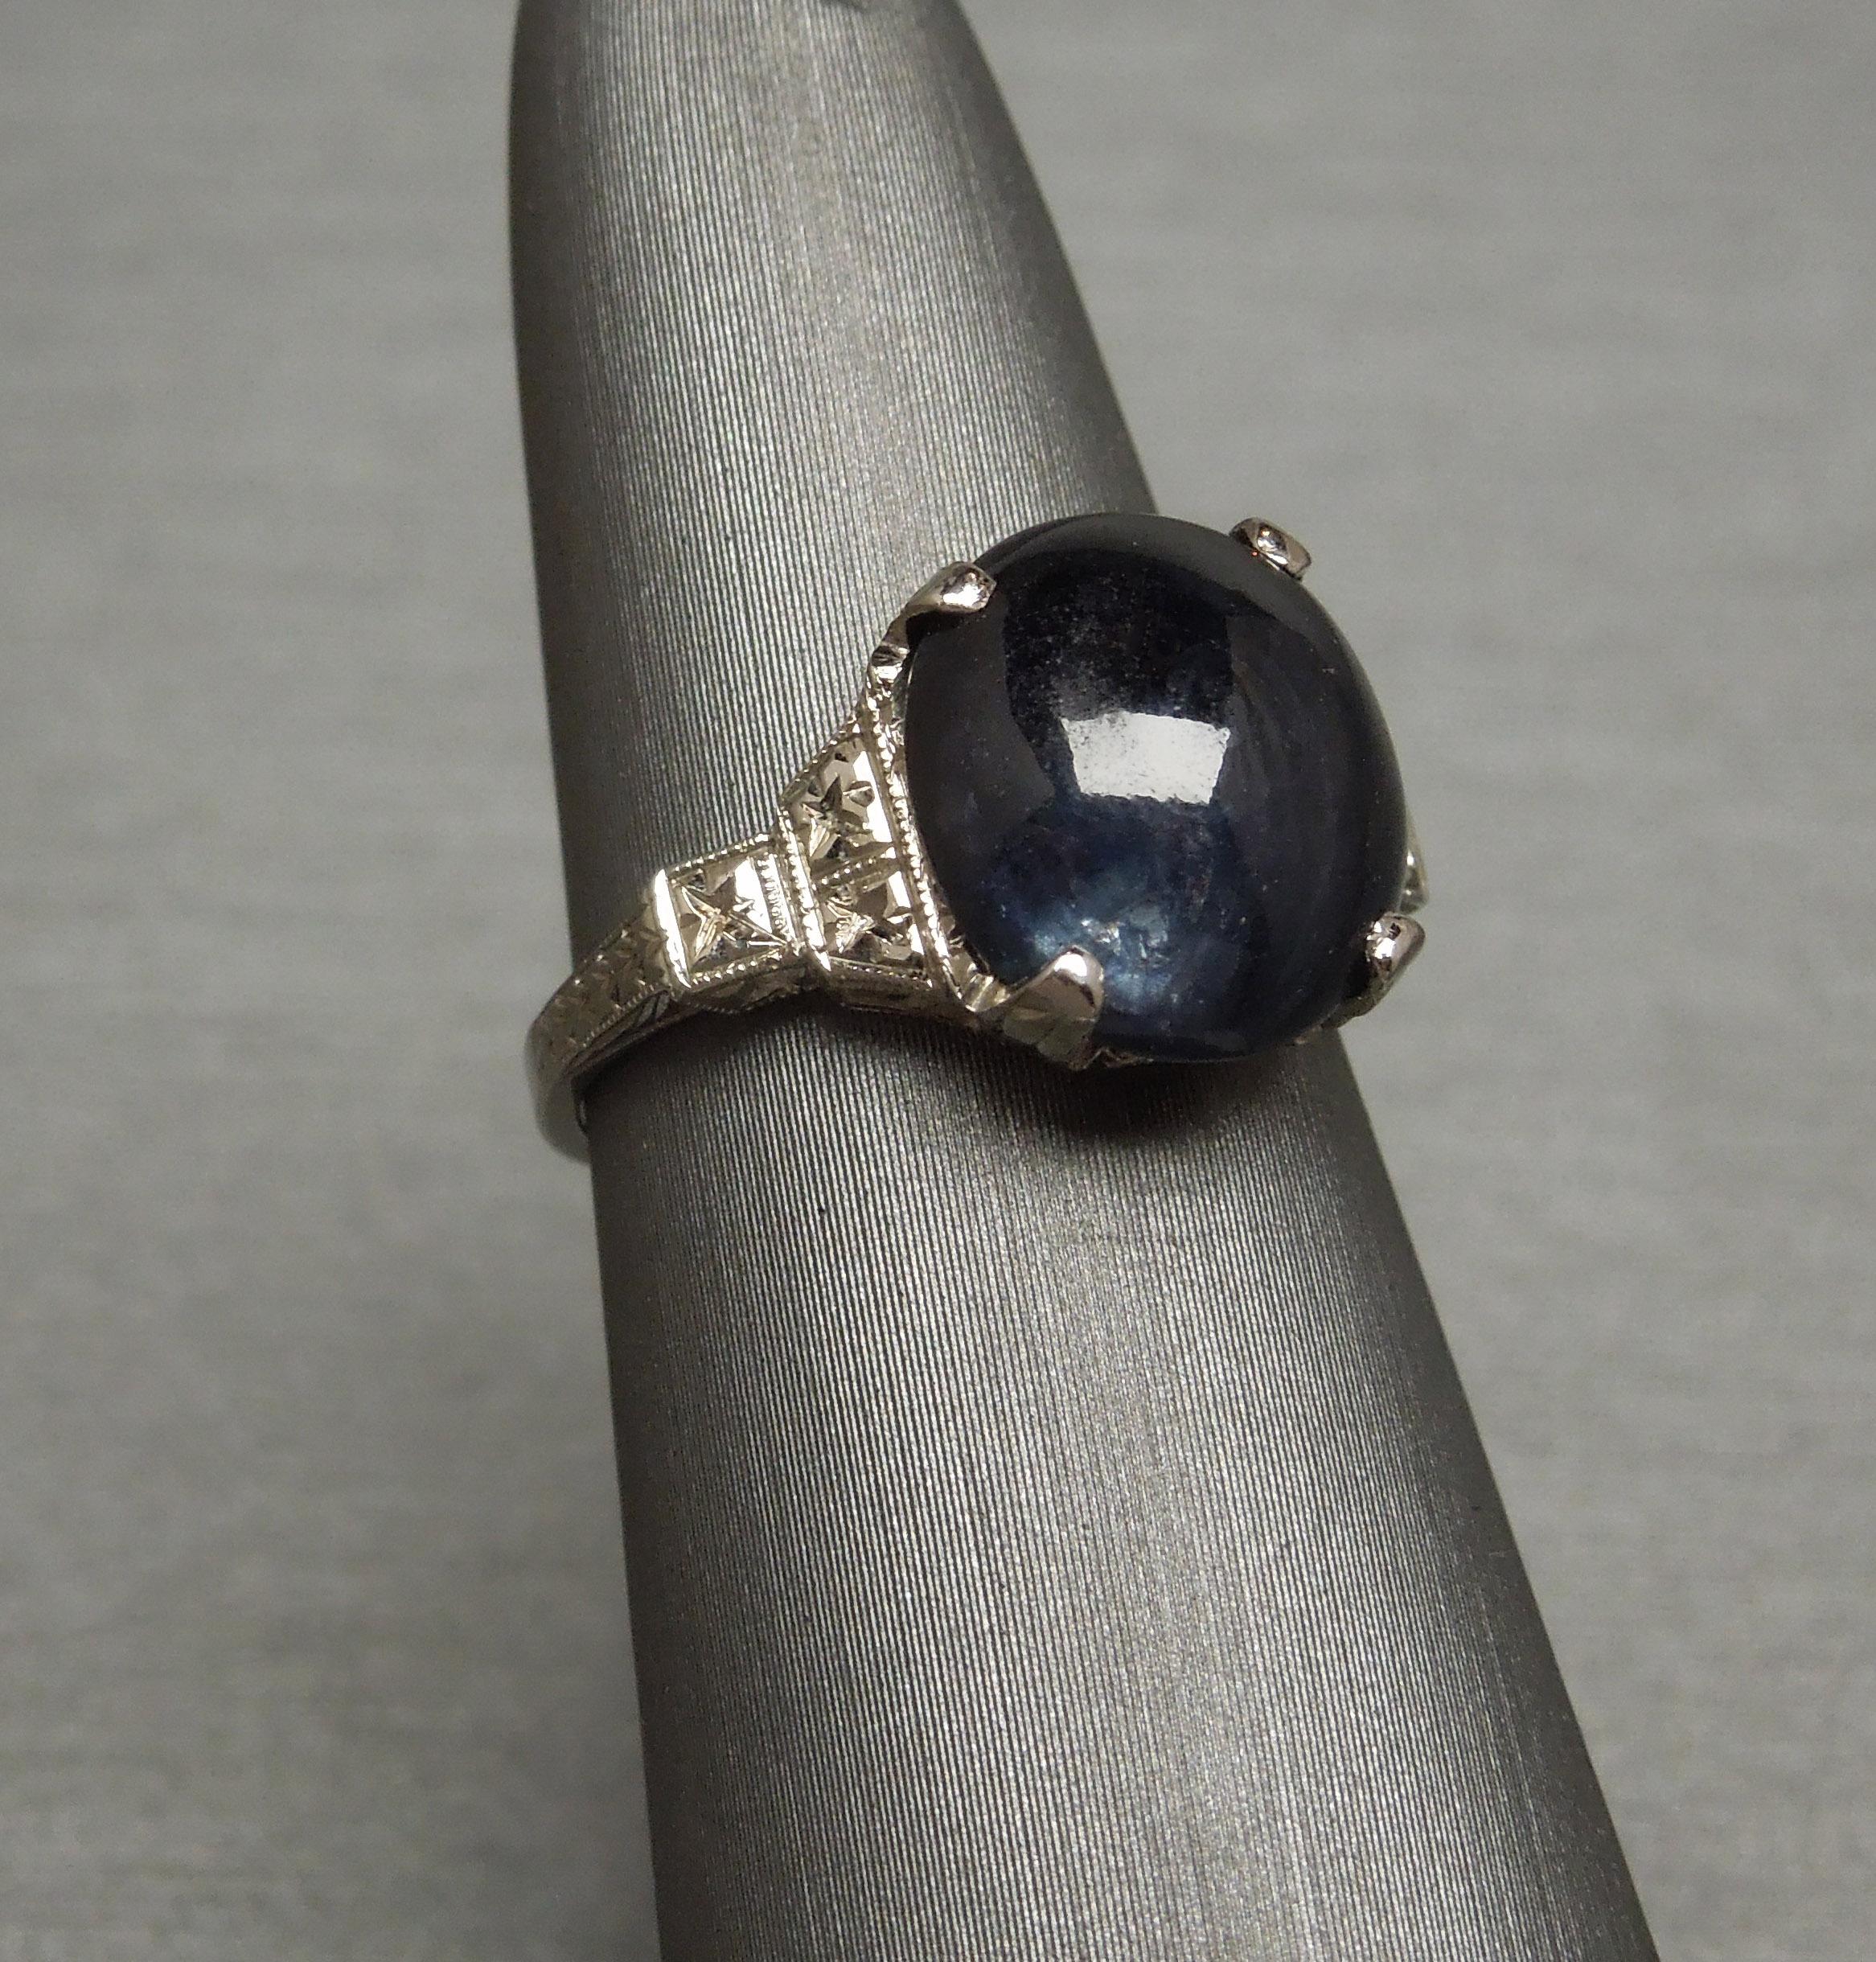 This period Art Deco Sapphire Solitaire ring in 14KT White Gold is subtly accented with exceptionally detailed Hand Engraving from prong tips to about 6.2mm down each side of band as well as some Milgrain detailing. Featuring a lone 6.85 carat Oval